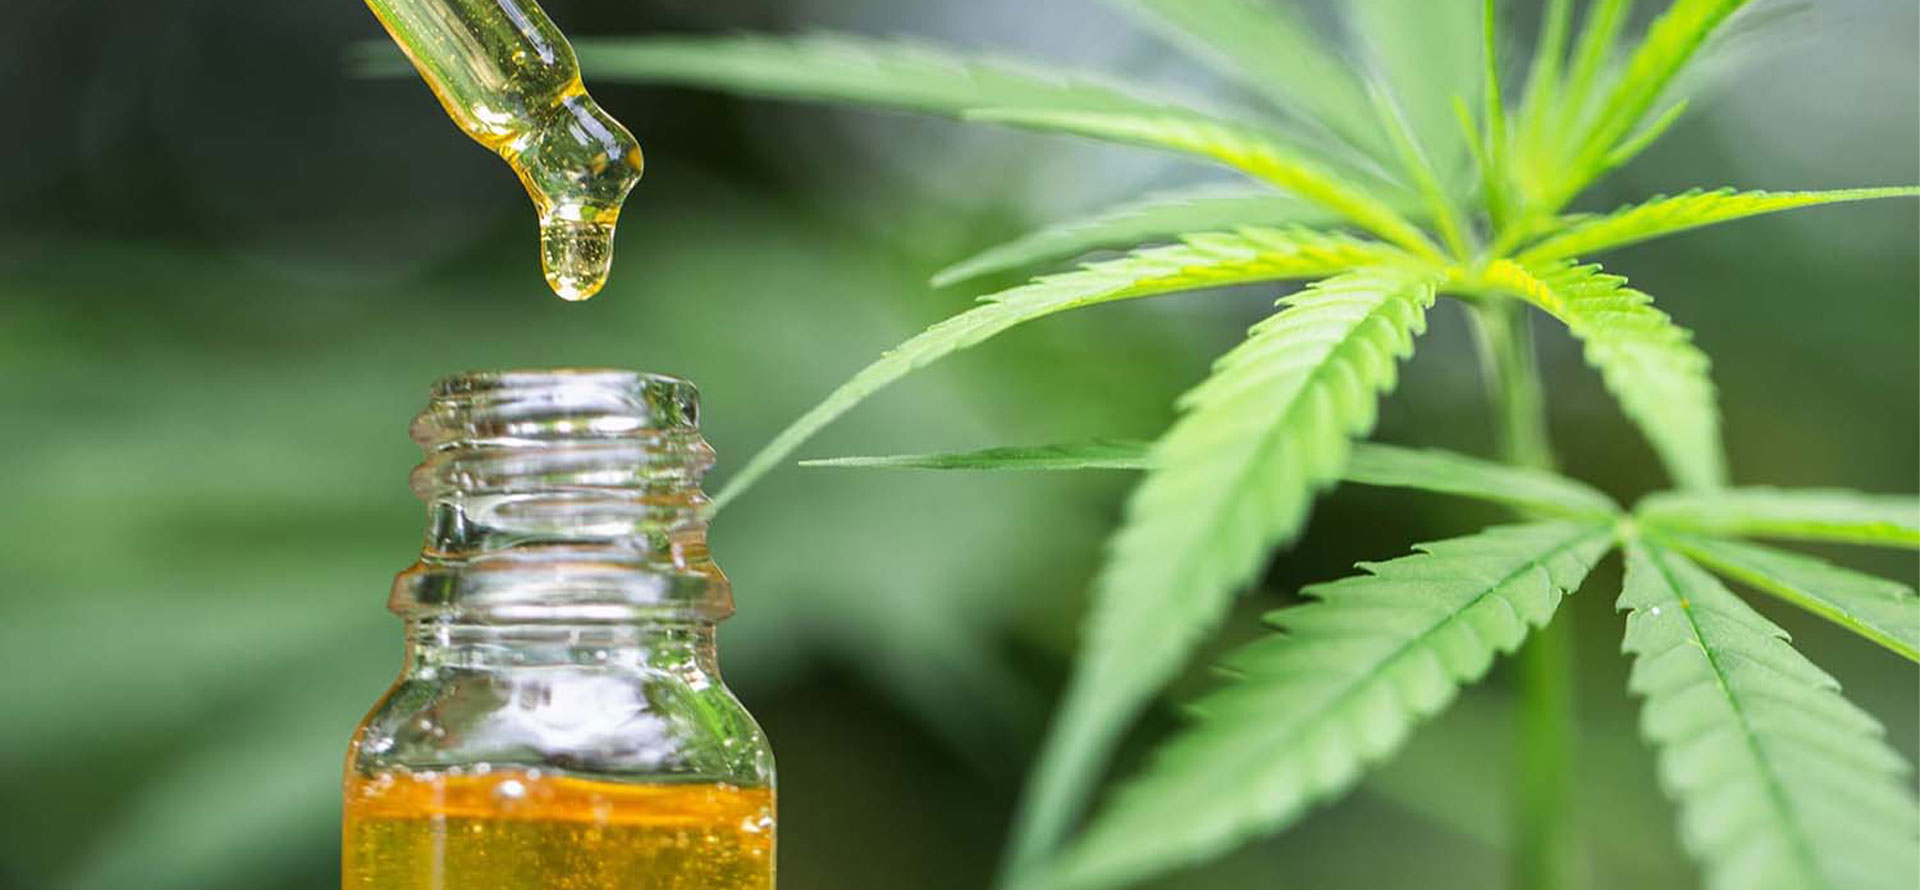 CAN CBC OIL MAKE YOU HIGH - Cbd|Oil|Benefits|Cbc|Effects|Pain|Study|Health|Thc|Products|Cannabinoids|Studies|Research|Anxiety|Cannabis|Symptoms|Evidence|People|System|Disease|Treatment|Inflammation|Hemp|Body|Receptors|Disorders|Brain|Plant|Cells|Side|Effect|Blood|Patients|Cancer|Product|Skin|Marijuana|Properties|Cannabidiol|Cannabinoid|Cbd Oil|Cbd Products|Cbc Oil|Side Effects|Endocannabinoid System|Chronic Pain|Multiple Sclerosis|Pain Relief|Cannabis Plant|Cbd Oil Benefits|Blood Pressure|Health Benefits|High Blood Pressure|Anti-Inflammatory Properties|Neuropathic Pain|Animal Studies|Hemp Plant|Hemp Oil|Anxiety Disorders|Cbd Product|Immune System|Clinical Trials|Cbd Gummies|Nerve Cells|Nervous System|Entourage Effect|Hemp Seed Oil|United States|Cbd Oils|Drug Administration